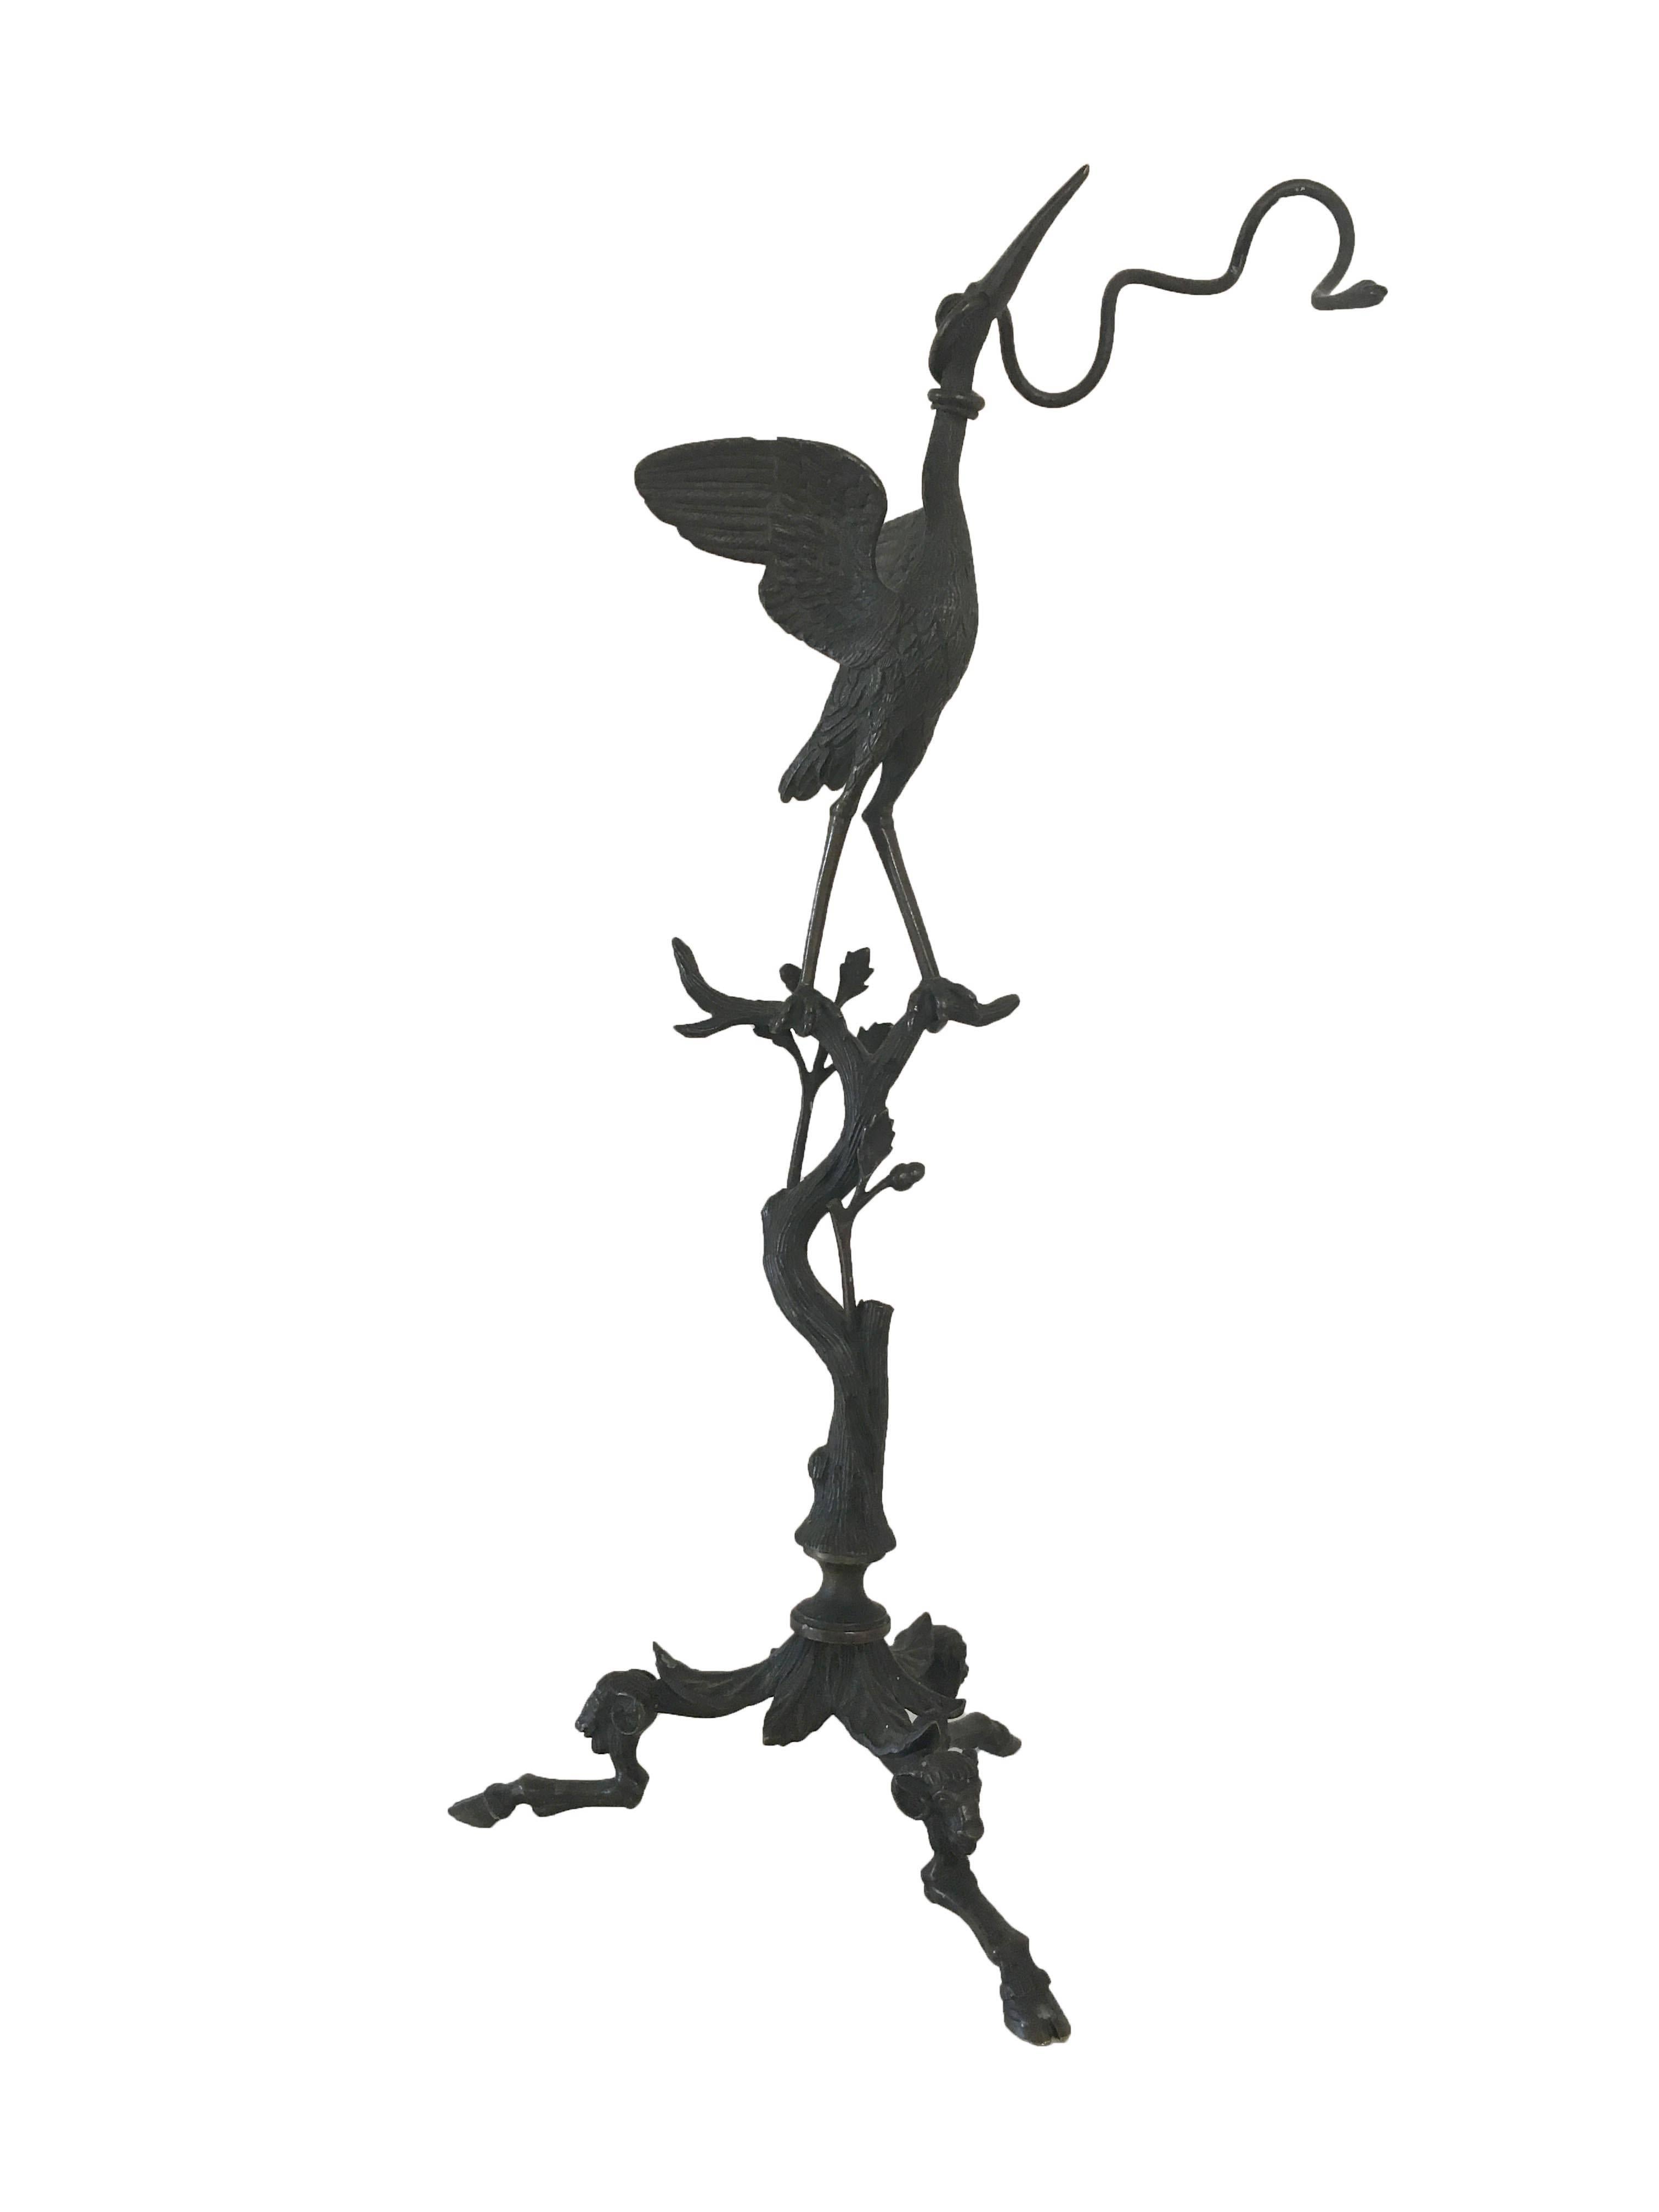 Bronze stylized sculpture of a stork holding a branch in the beak, with additional branch detailing below and on hooved feet.